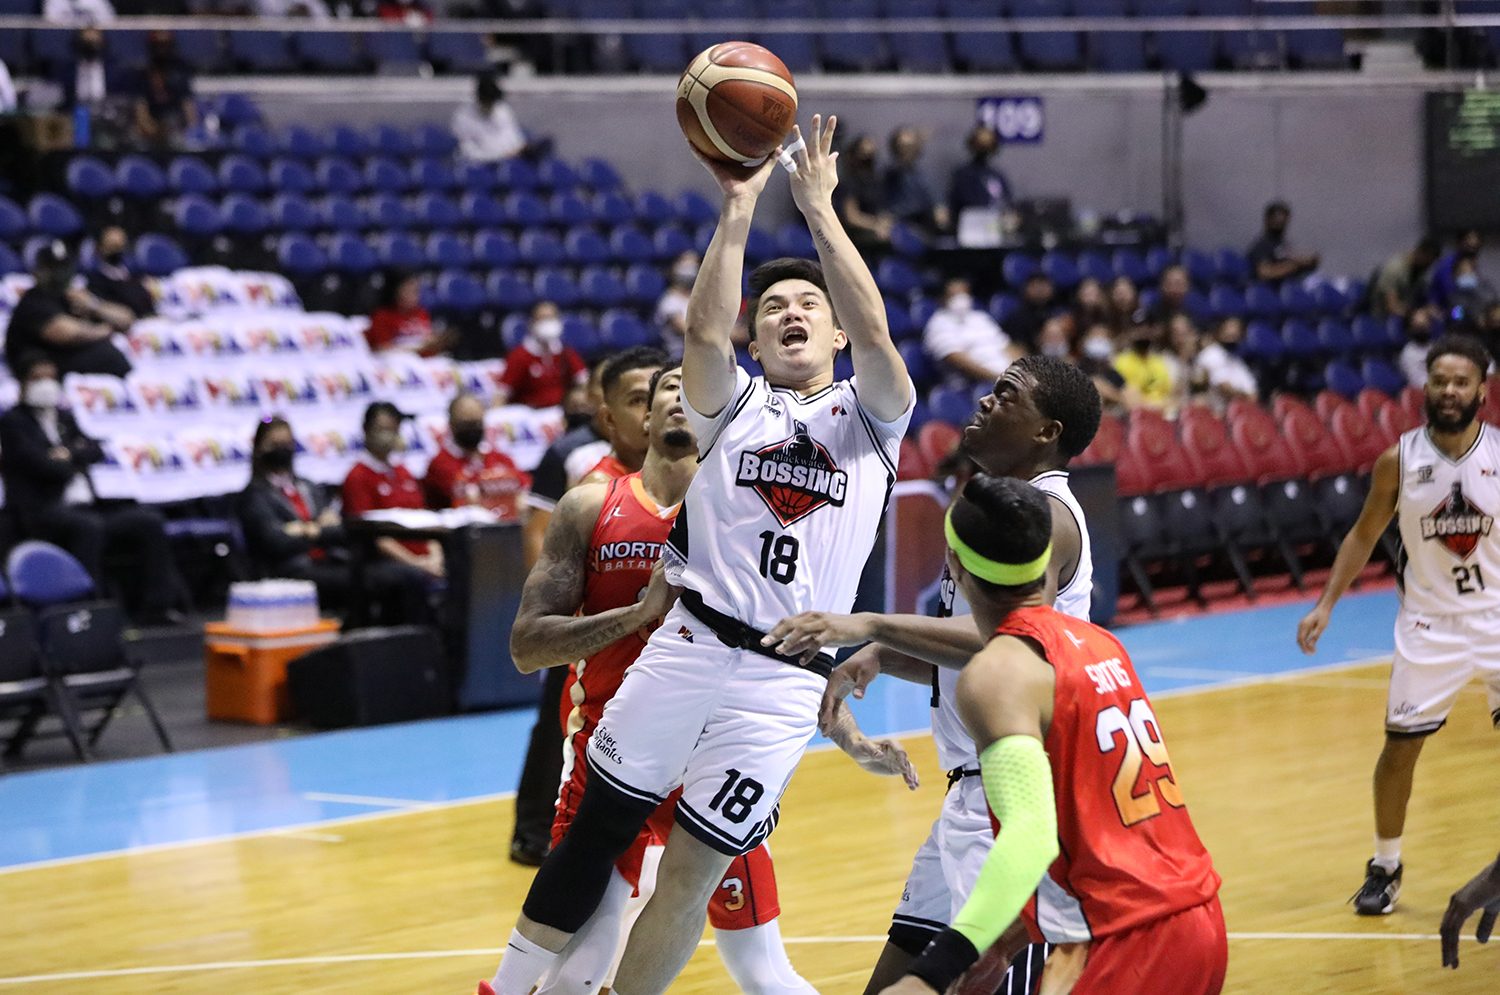 Embattled Blackwater guard Paul Desiderio retires from the PBA